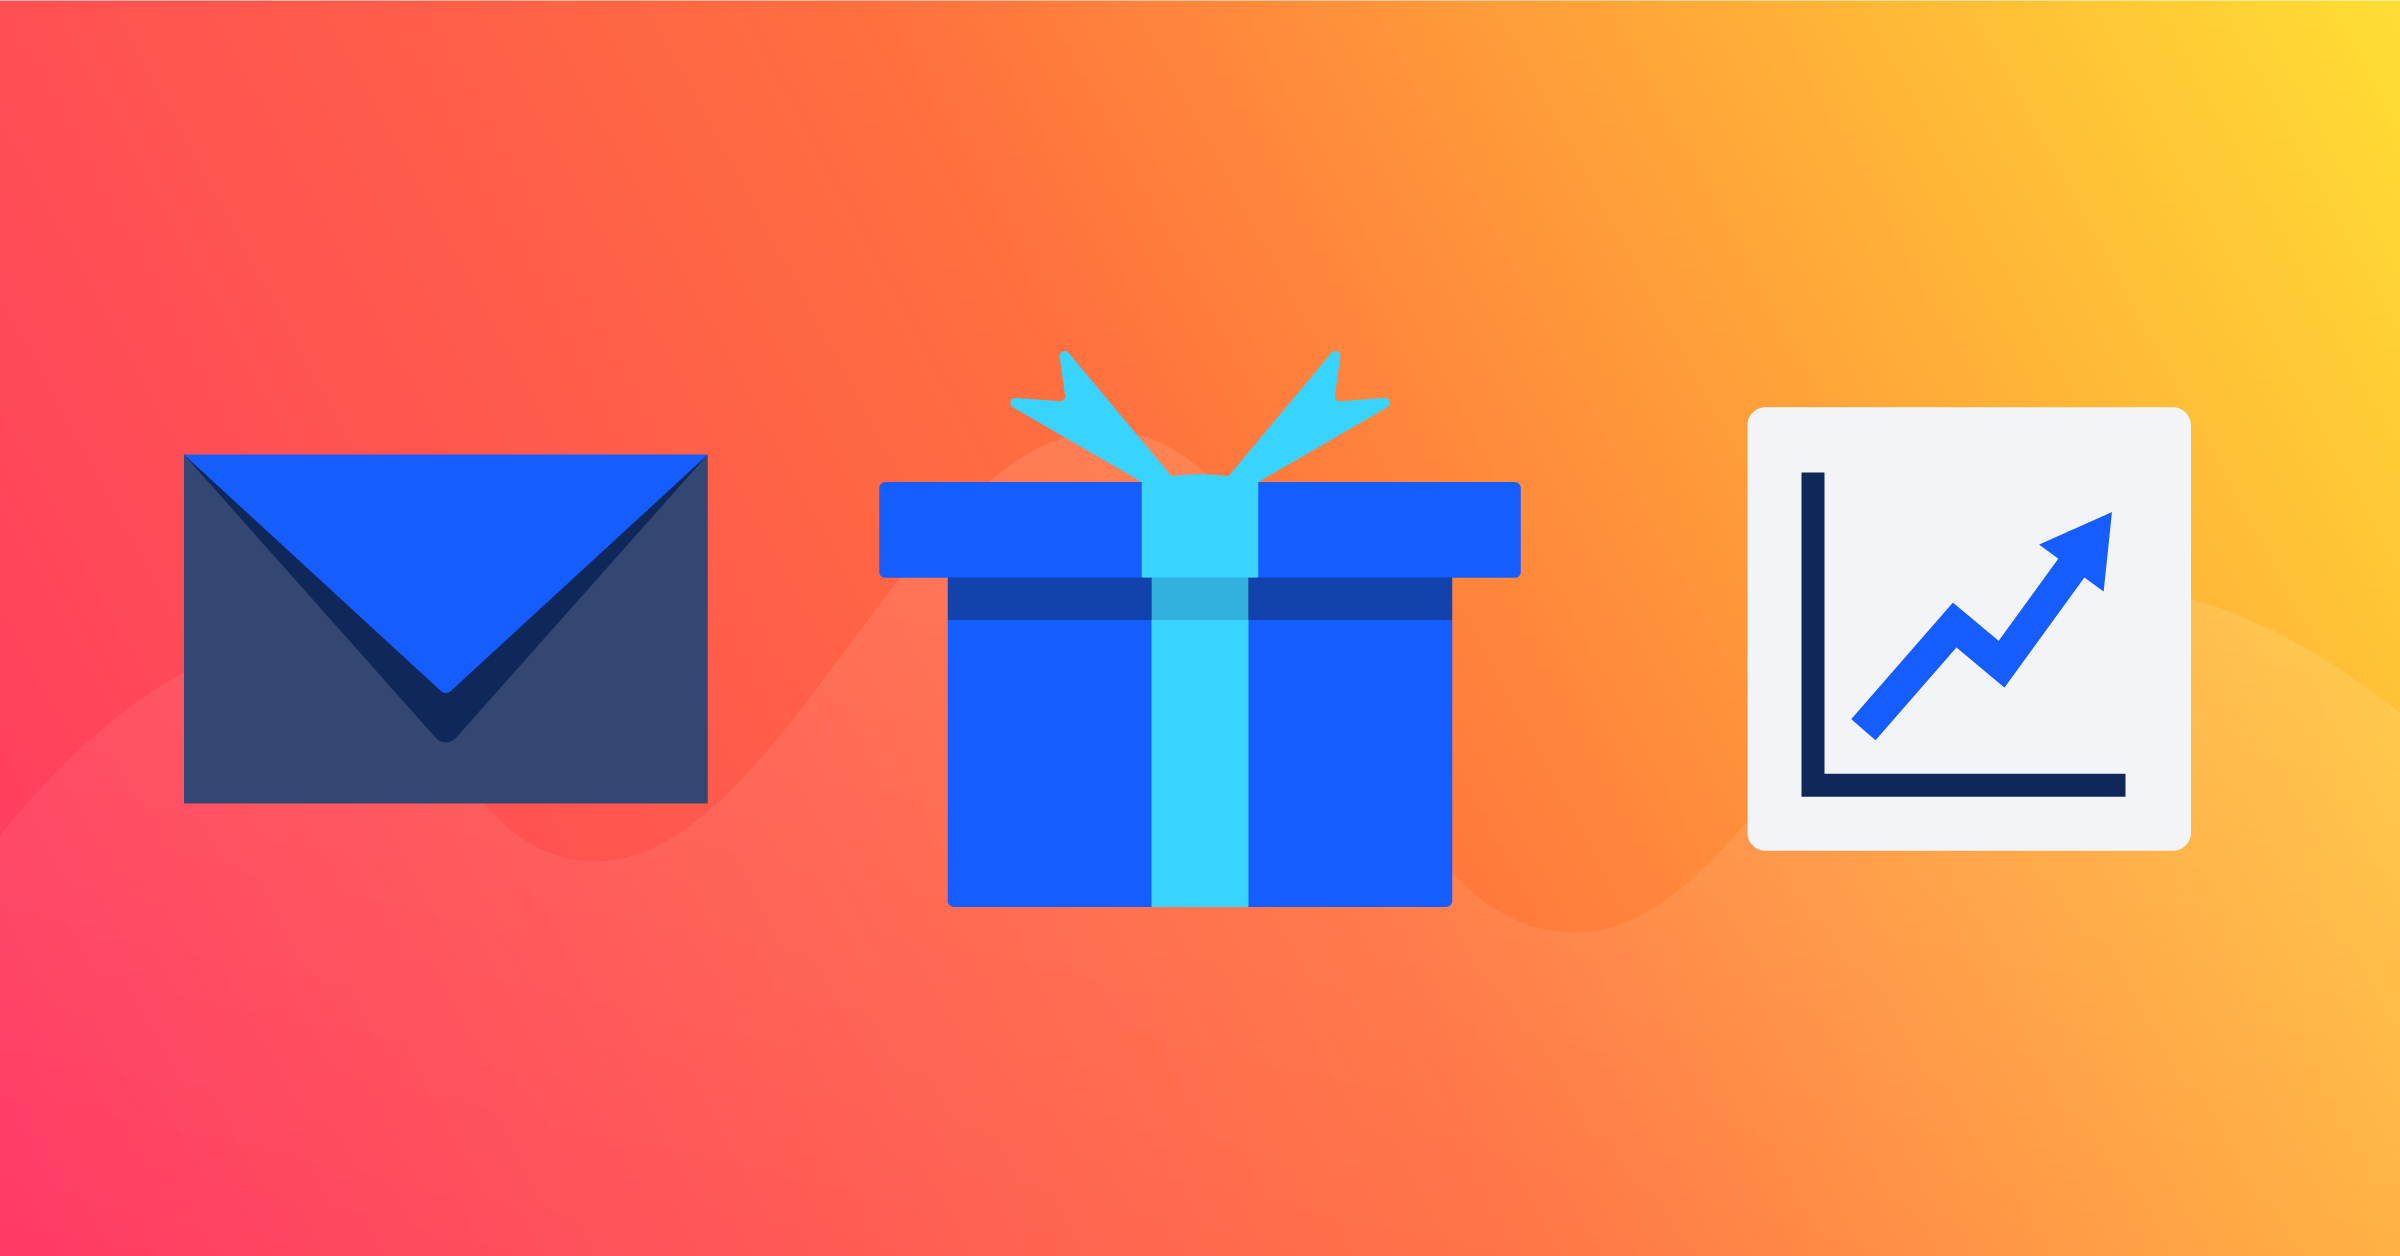 Important email marketing trends for contests and giveaways in 2019 and 2020